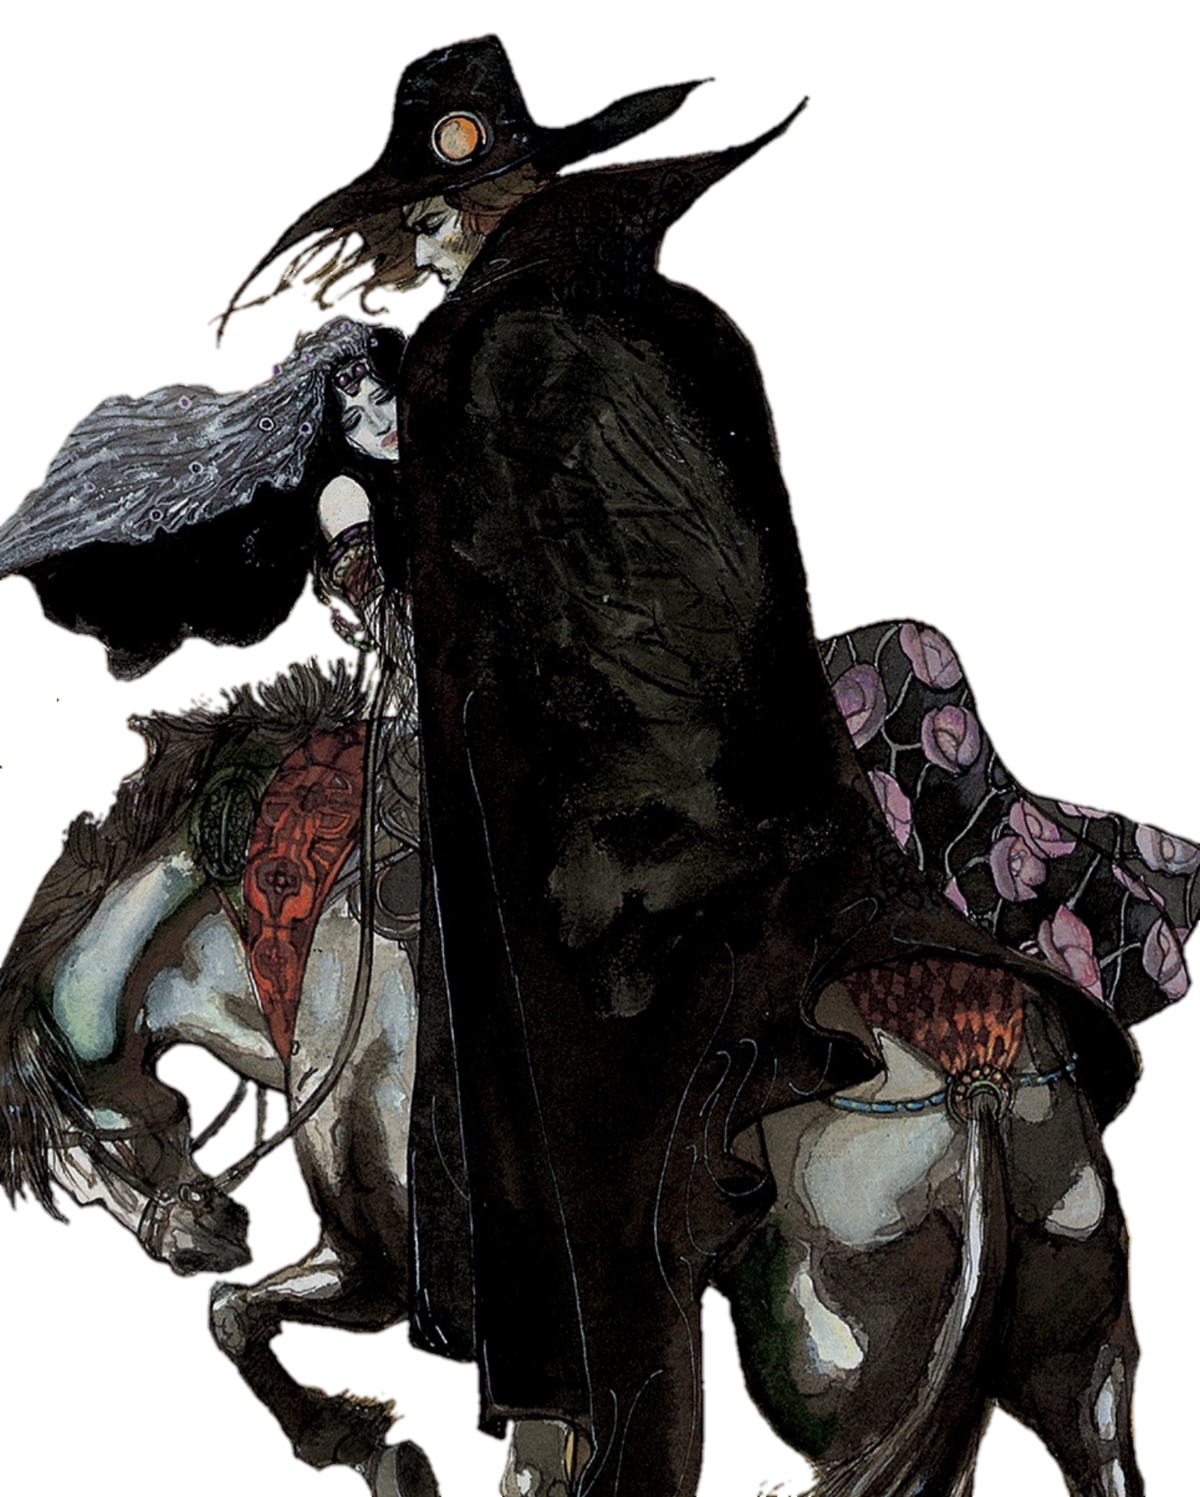 Category:Characters, Vampire Hunter D Wiki